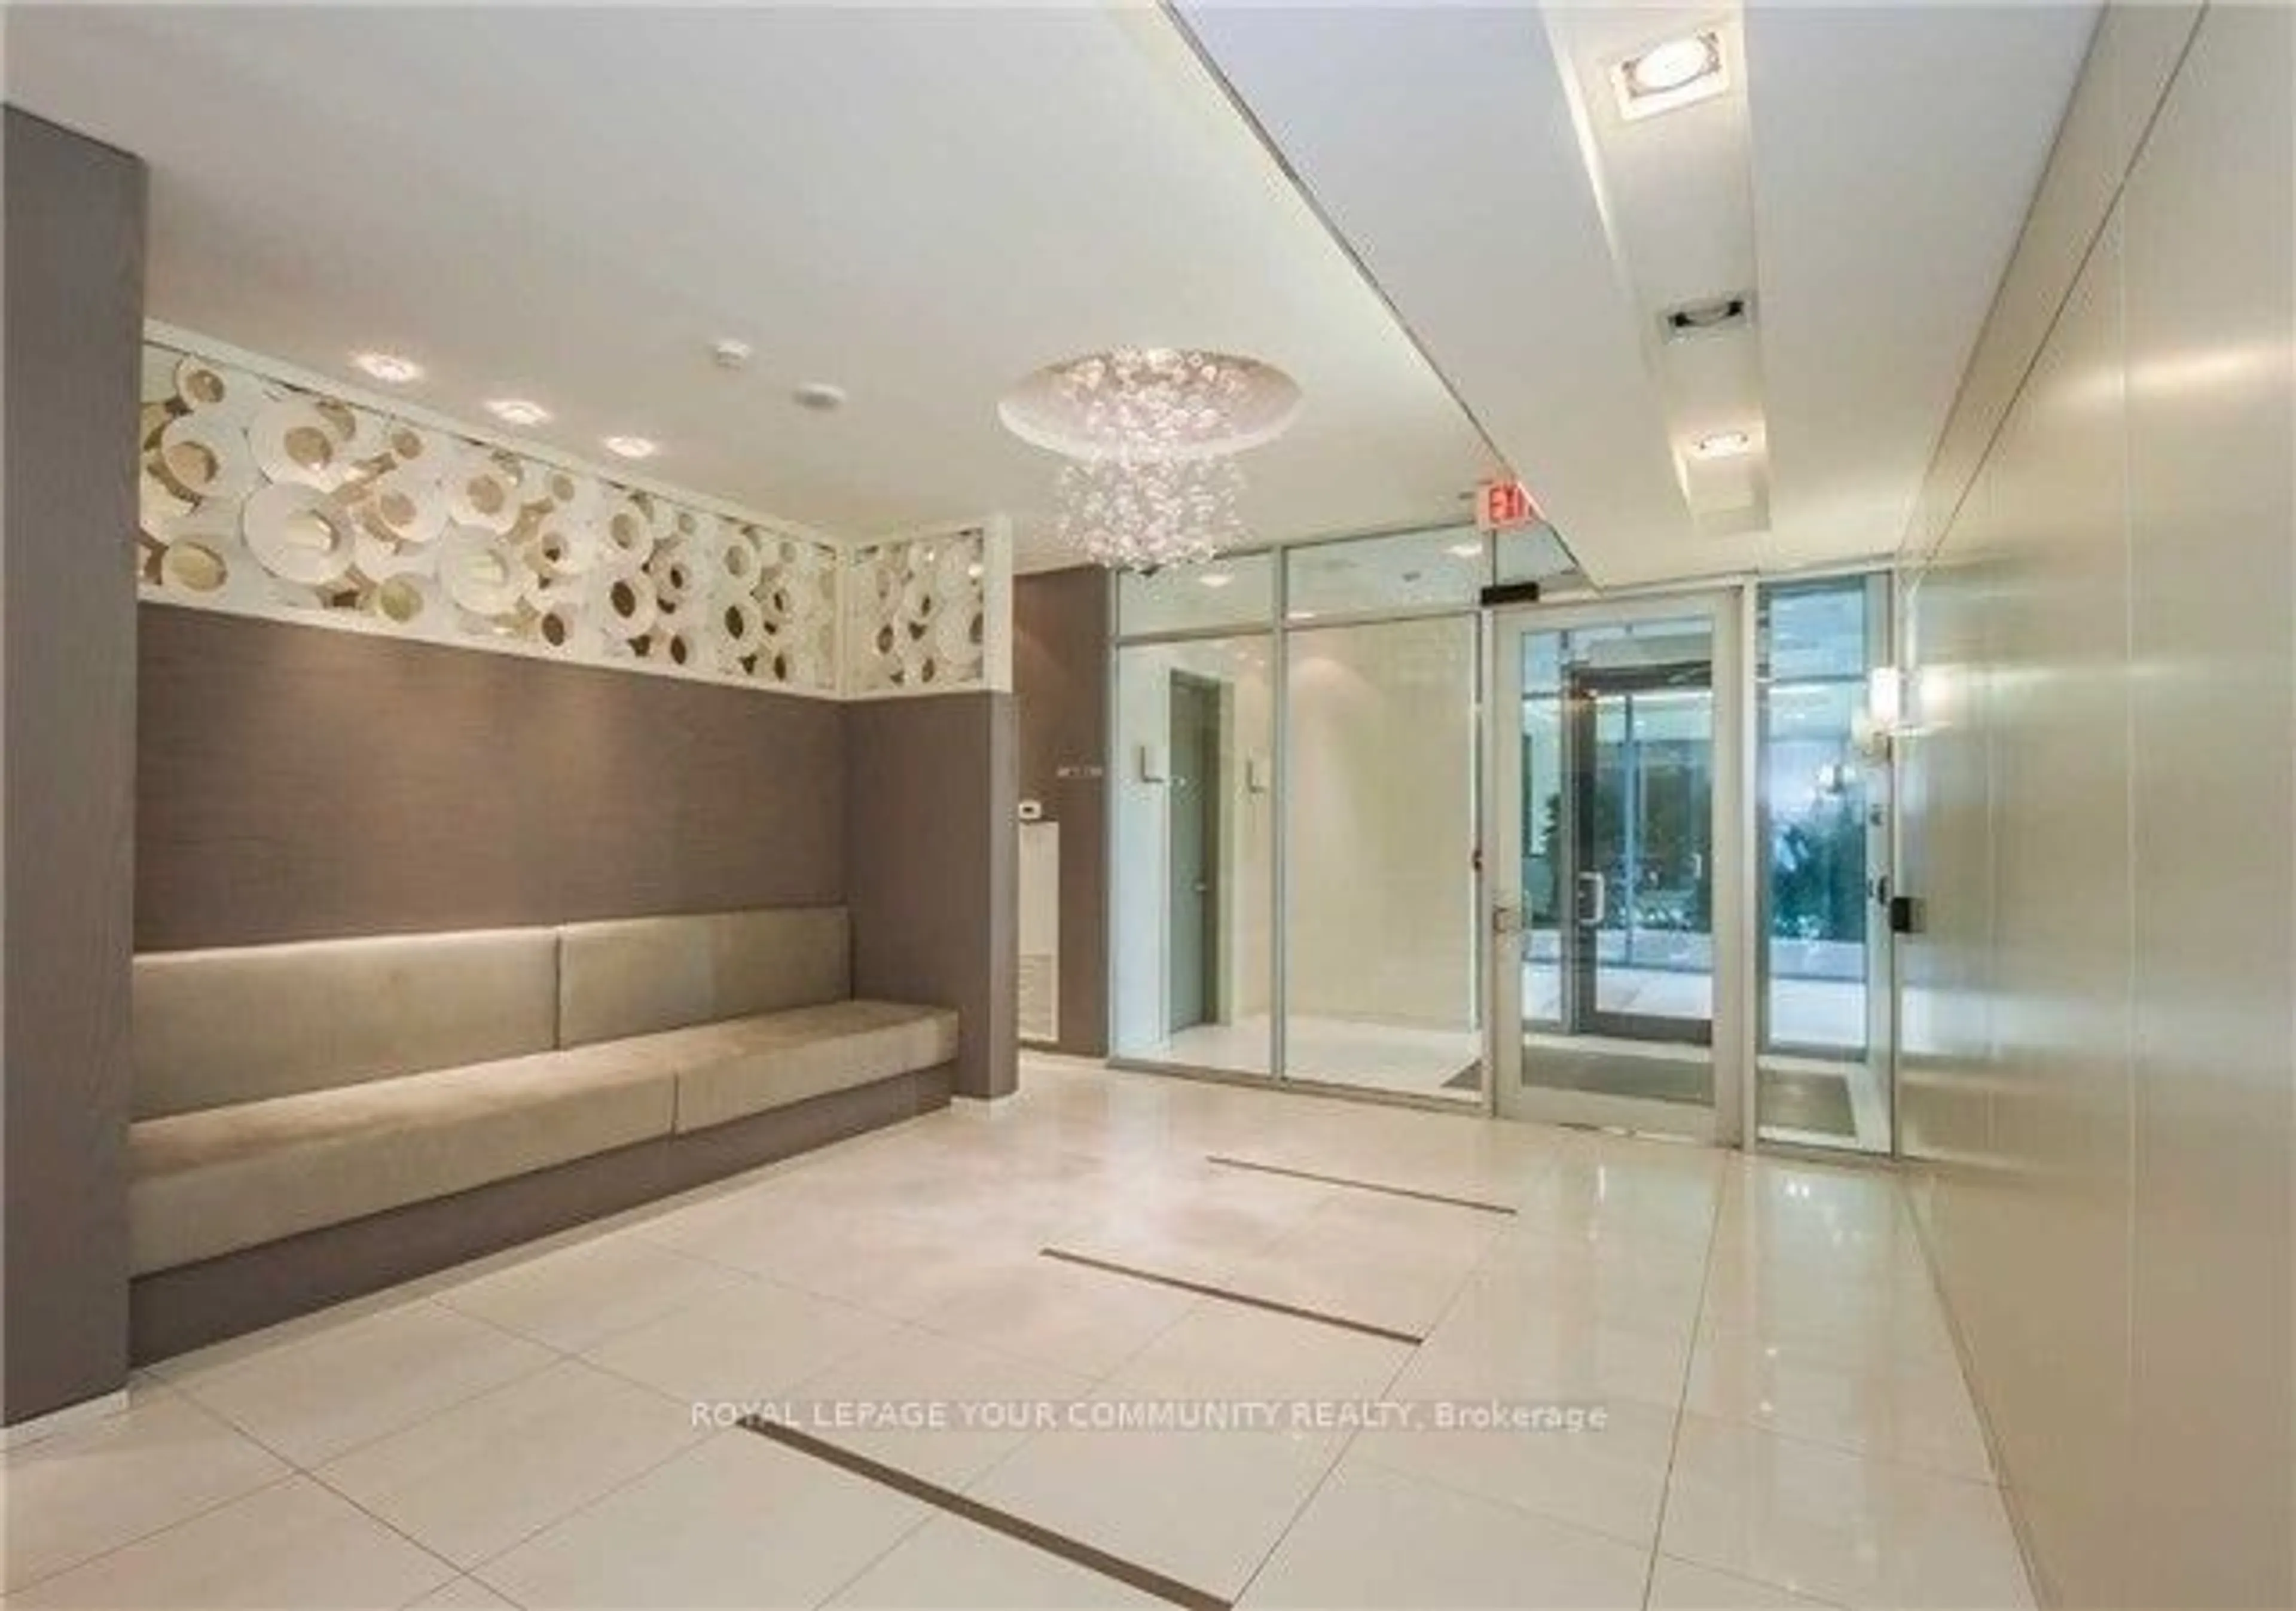 Indoor foyer for 9090 Yonge St #Lph 01, Richmond Hill Ontario L4C 0Z1